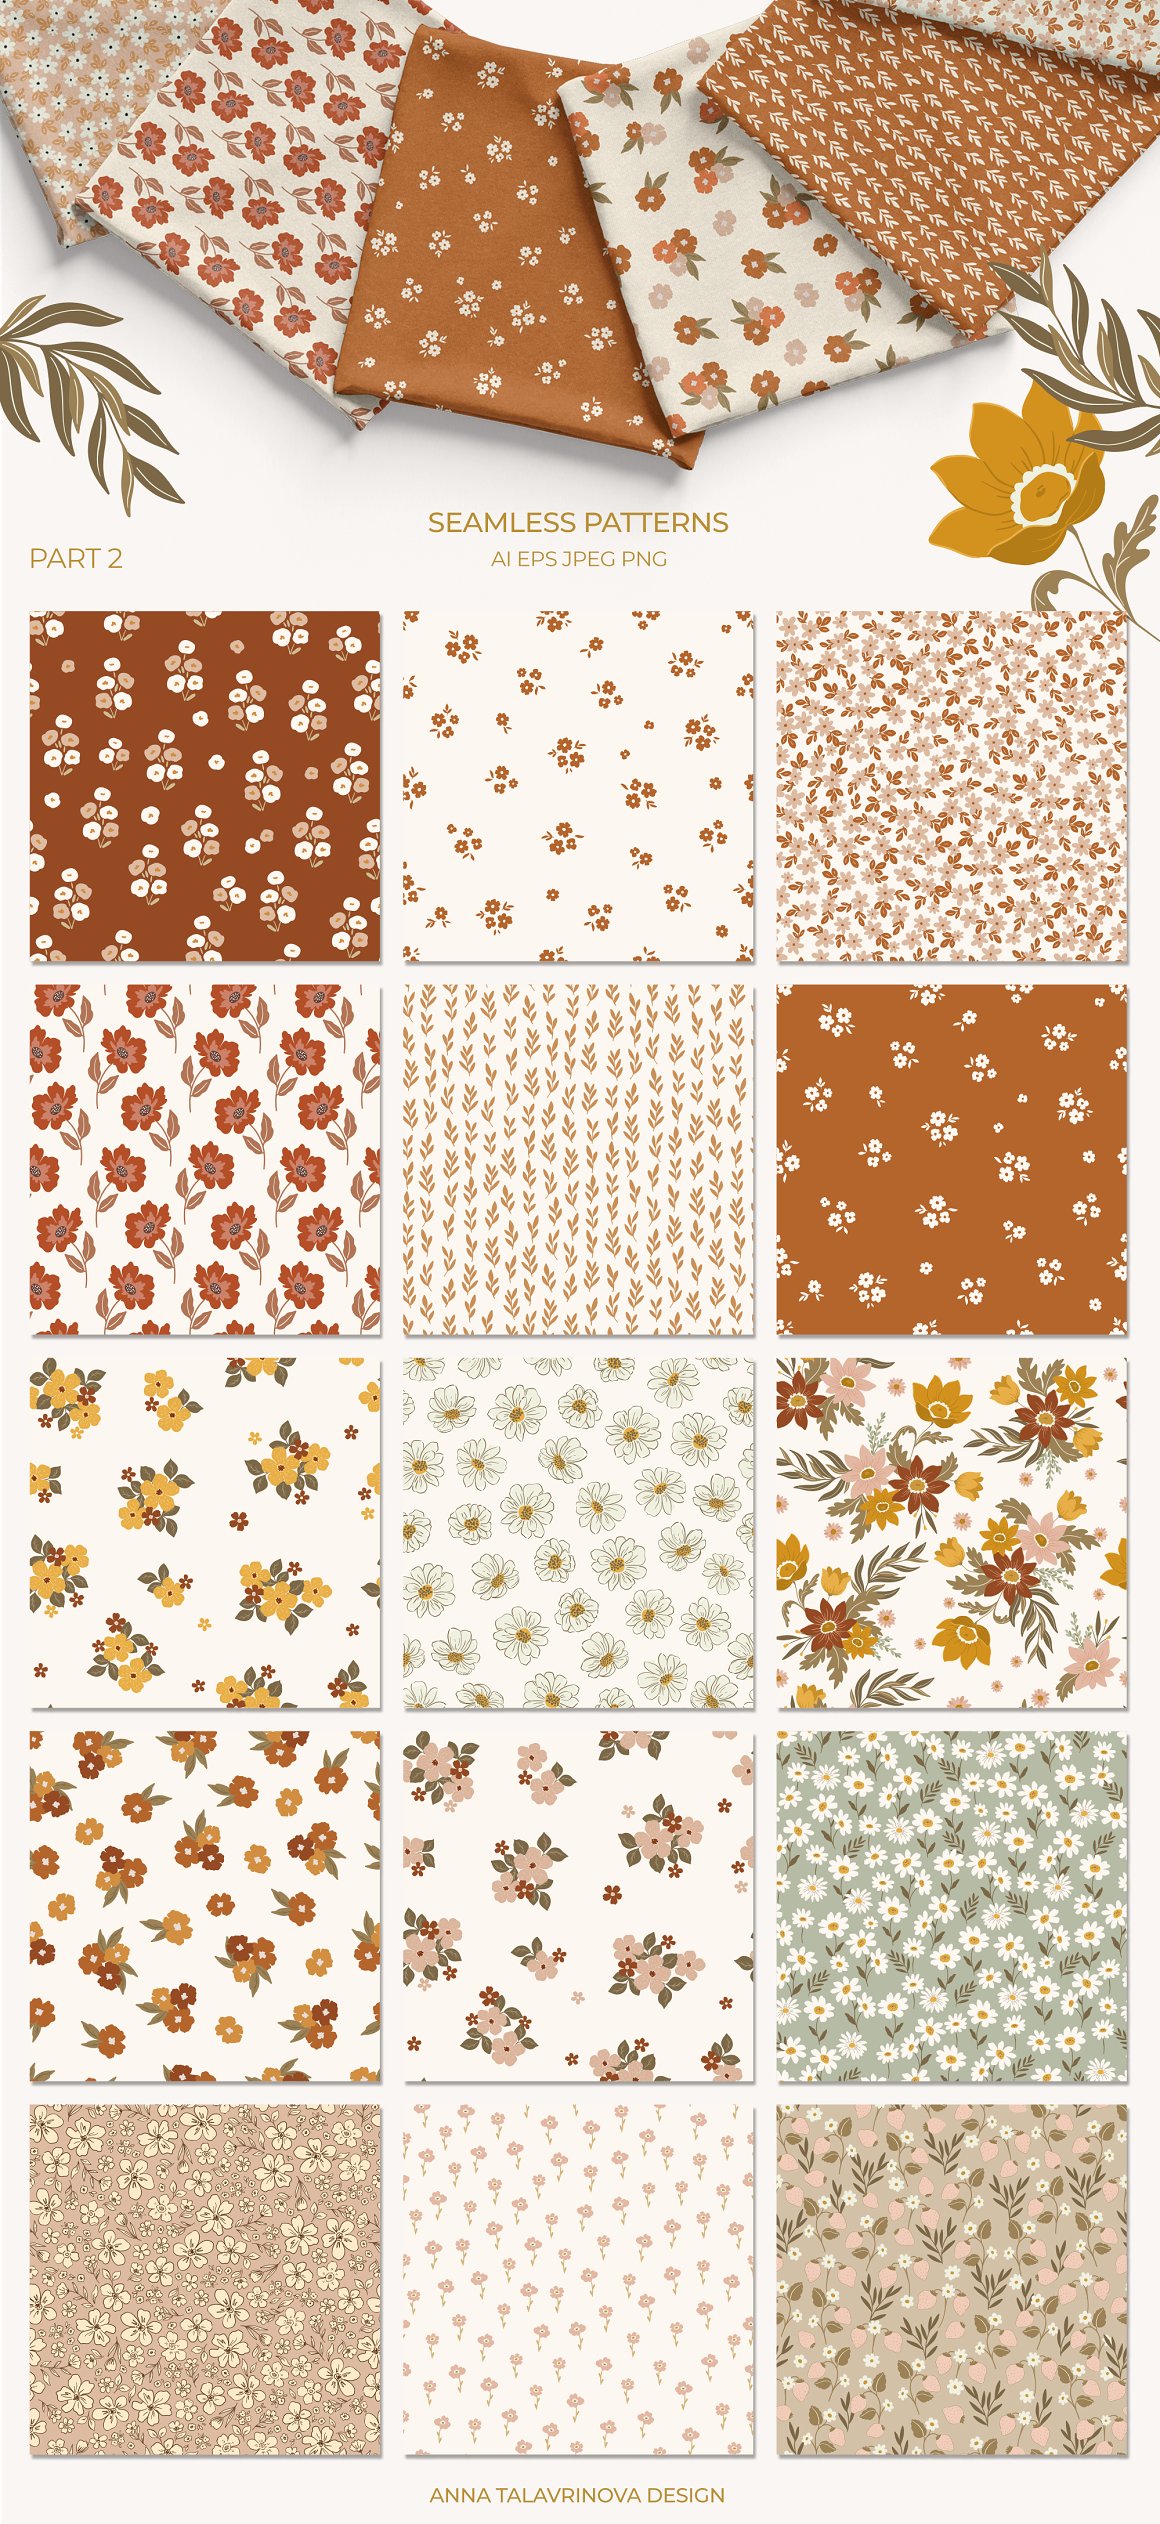 15 different warm florals seamless patterns on a gray background.